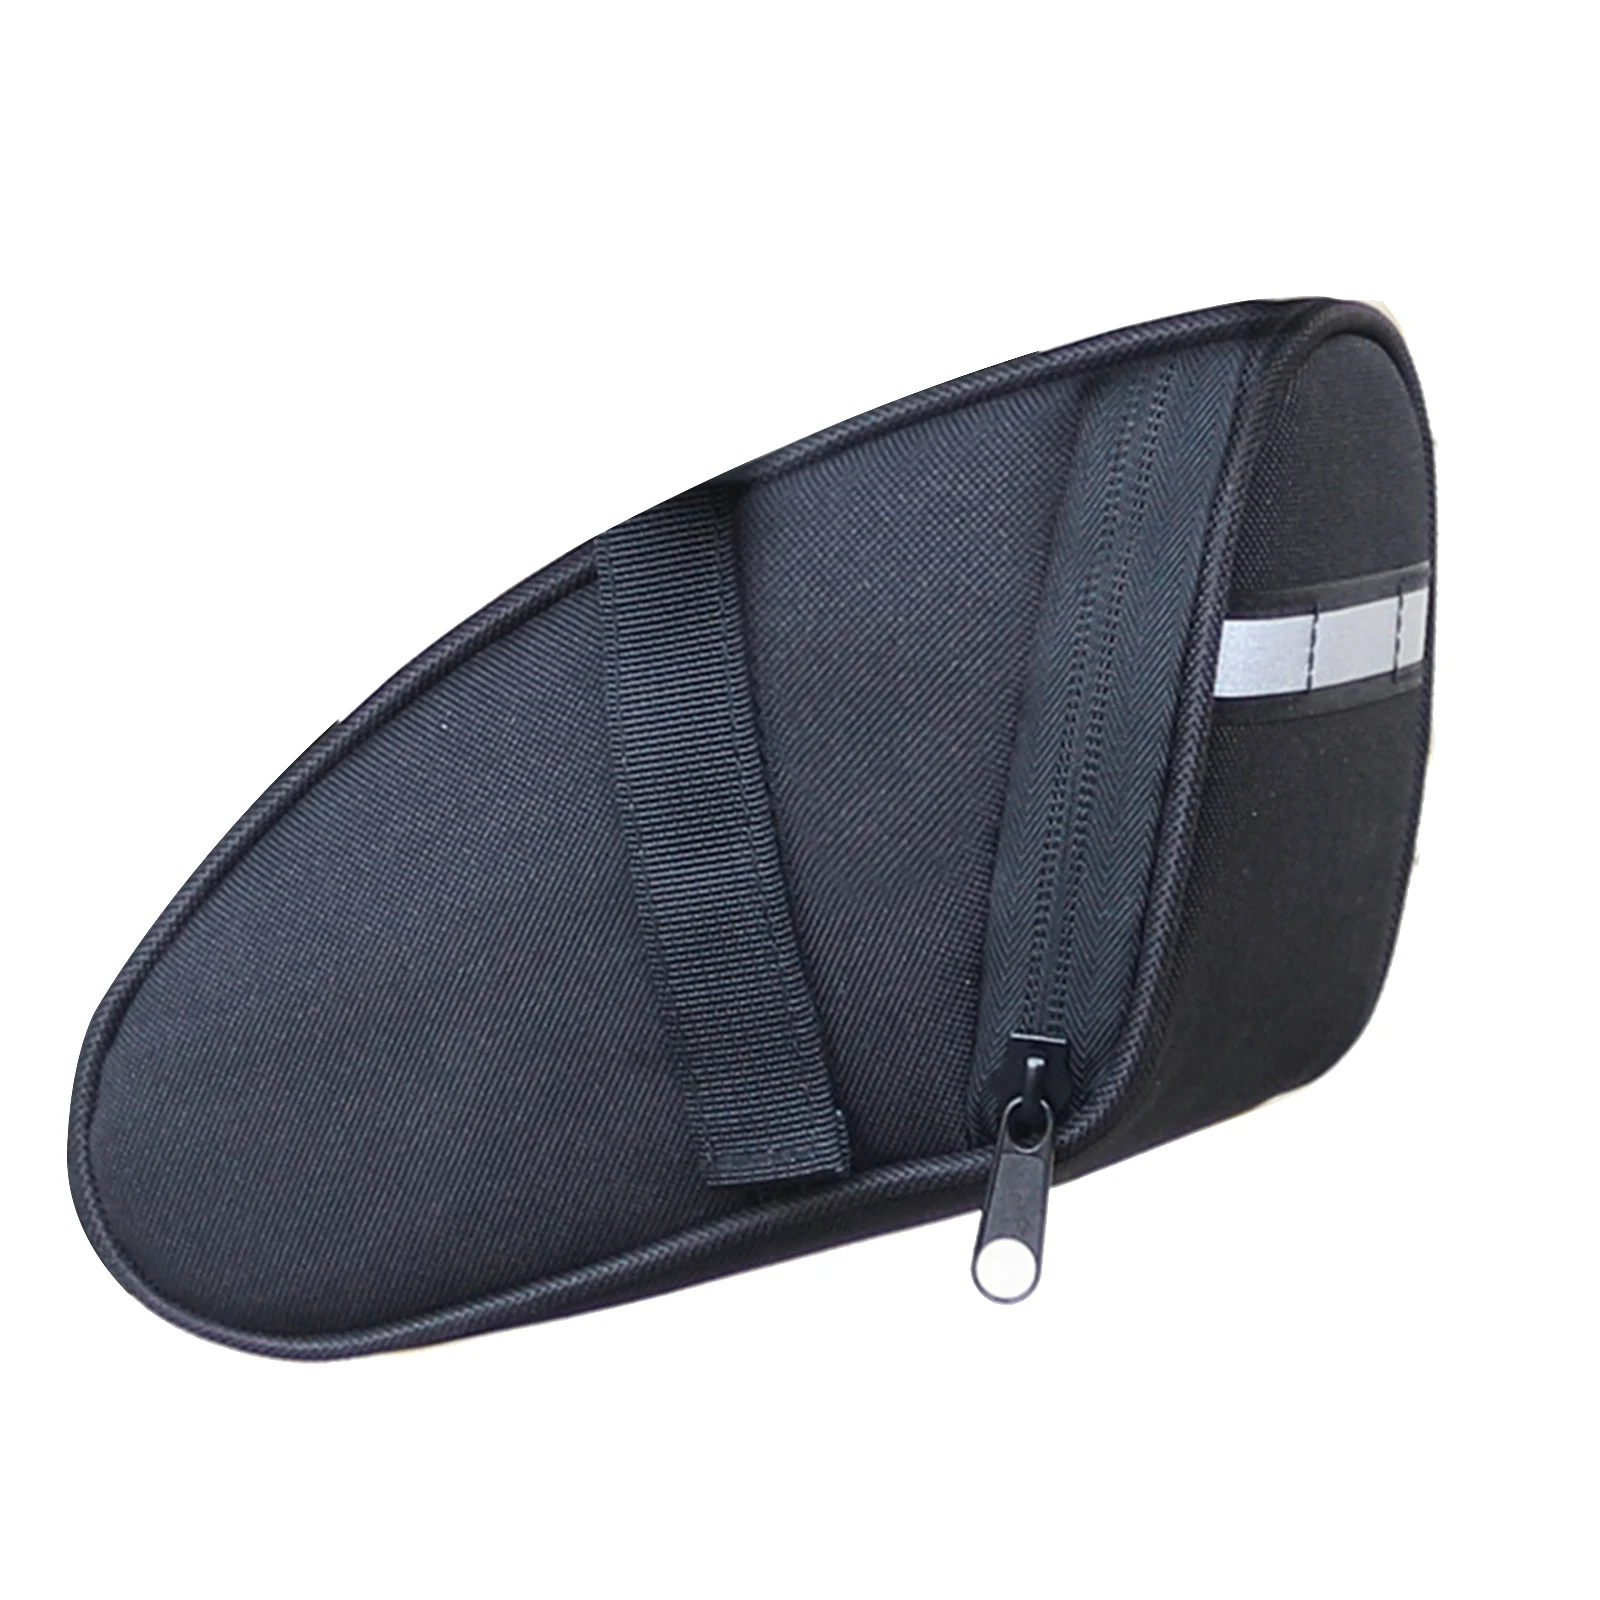 

Bike Bicycle Storage Saddle Bag Canvas Cycling Seat Tail Rear Pouch Wedge Bags Bolsa Bicicleta Accessories Waterproof